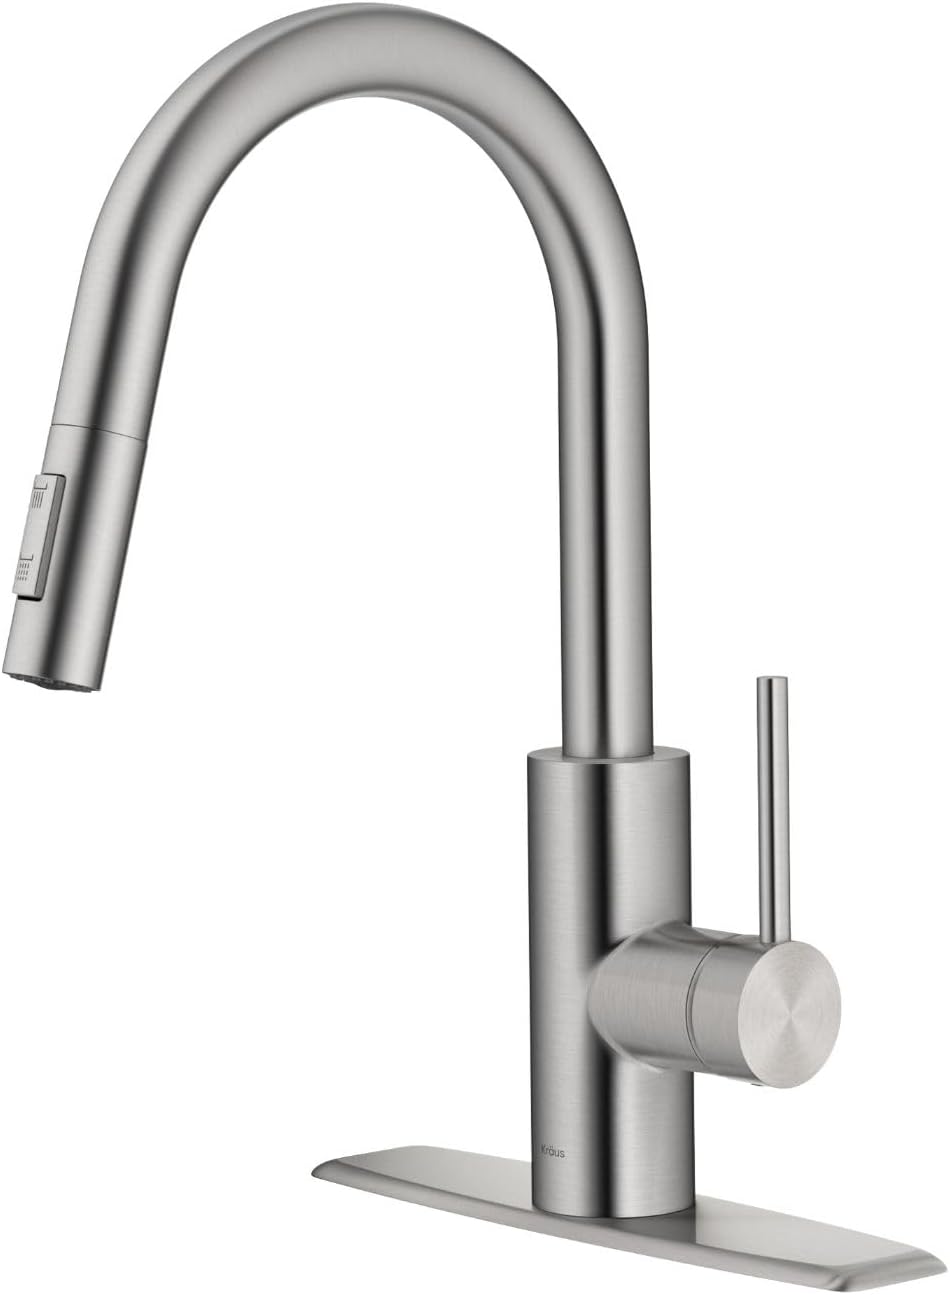 The Kraus kitchen faucet is a fantastic addition to any kitchen. One of its standout features is its super easy installation process, which makes it a hassle-free upgrade for any homeowner. Additionally, its impressive height adds a touch of elegance to the kitchen while also providing ample space for filling and cleaning large pots and dishes. Overall, the Kraus kitchen faucet combines ease of installation with practical design, making it a great choice for those seeking a functional and stylis